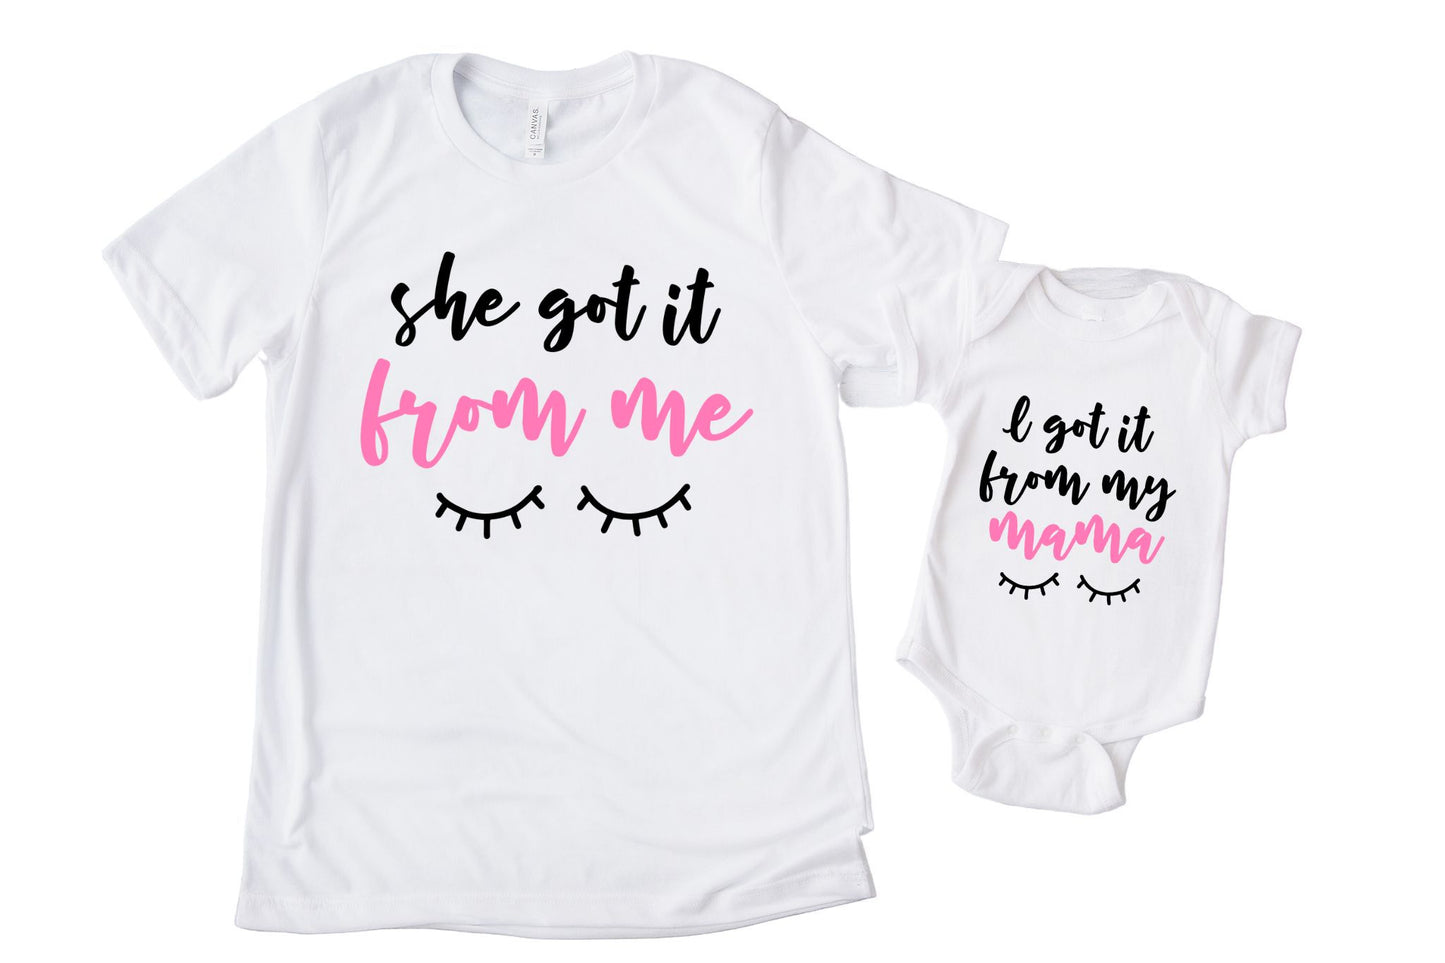 She Got it From Me / I Got it from Mama Matching Shirt Set